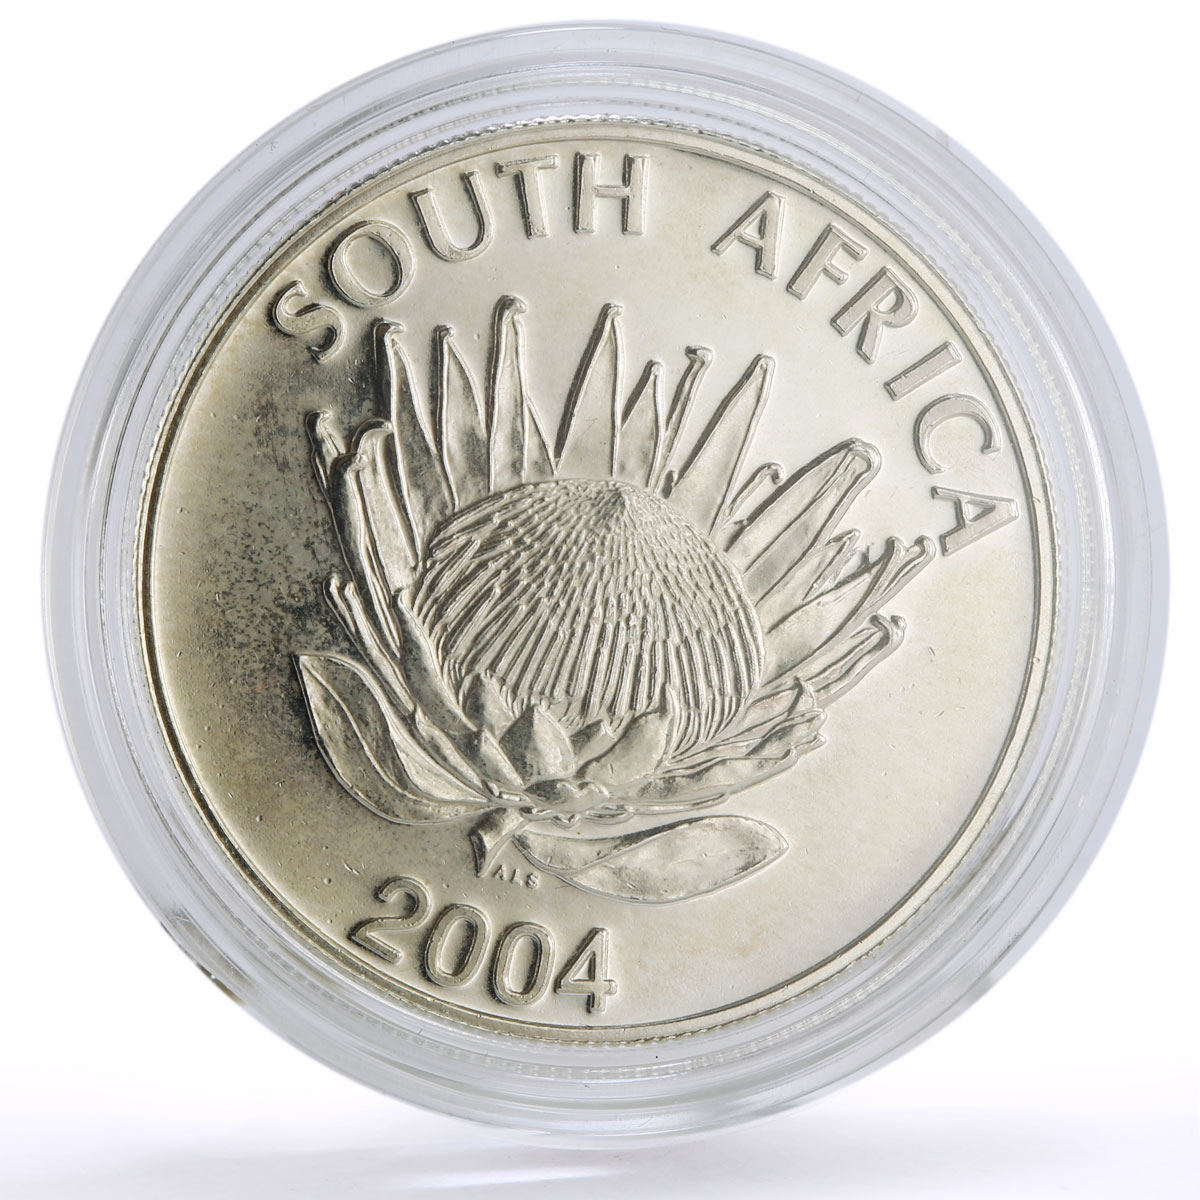 South Africa 1 rand 10 Years of Democracy Fish Stork Kudu Birds silver coin 2004